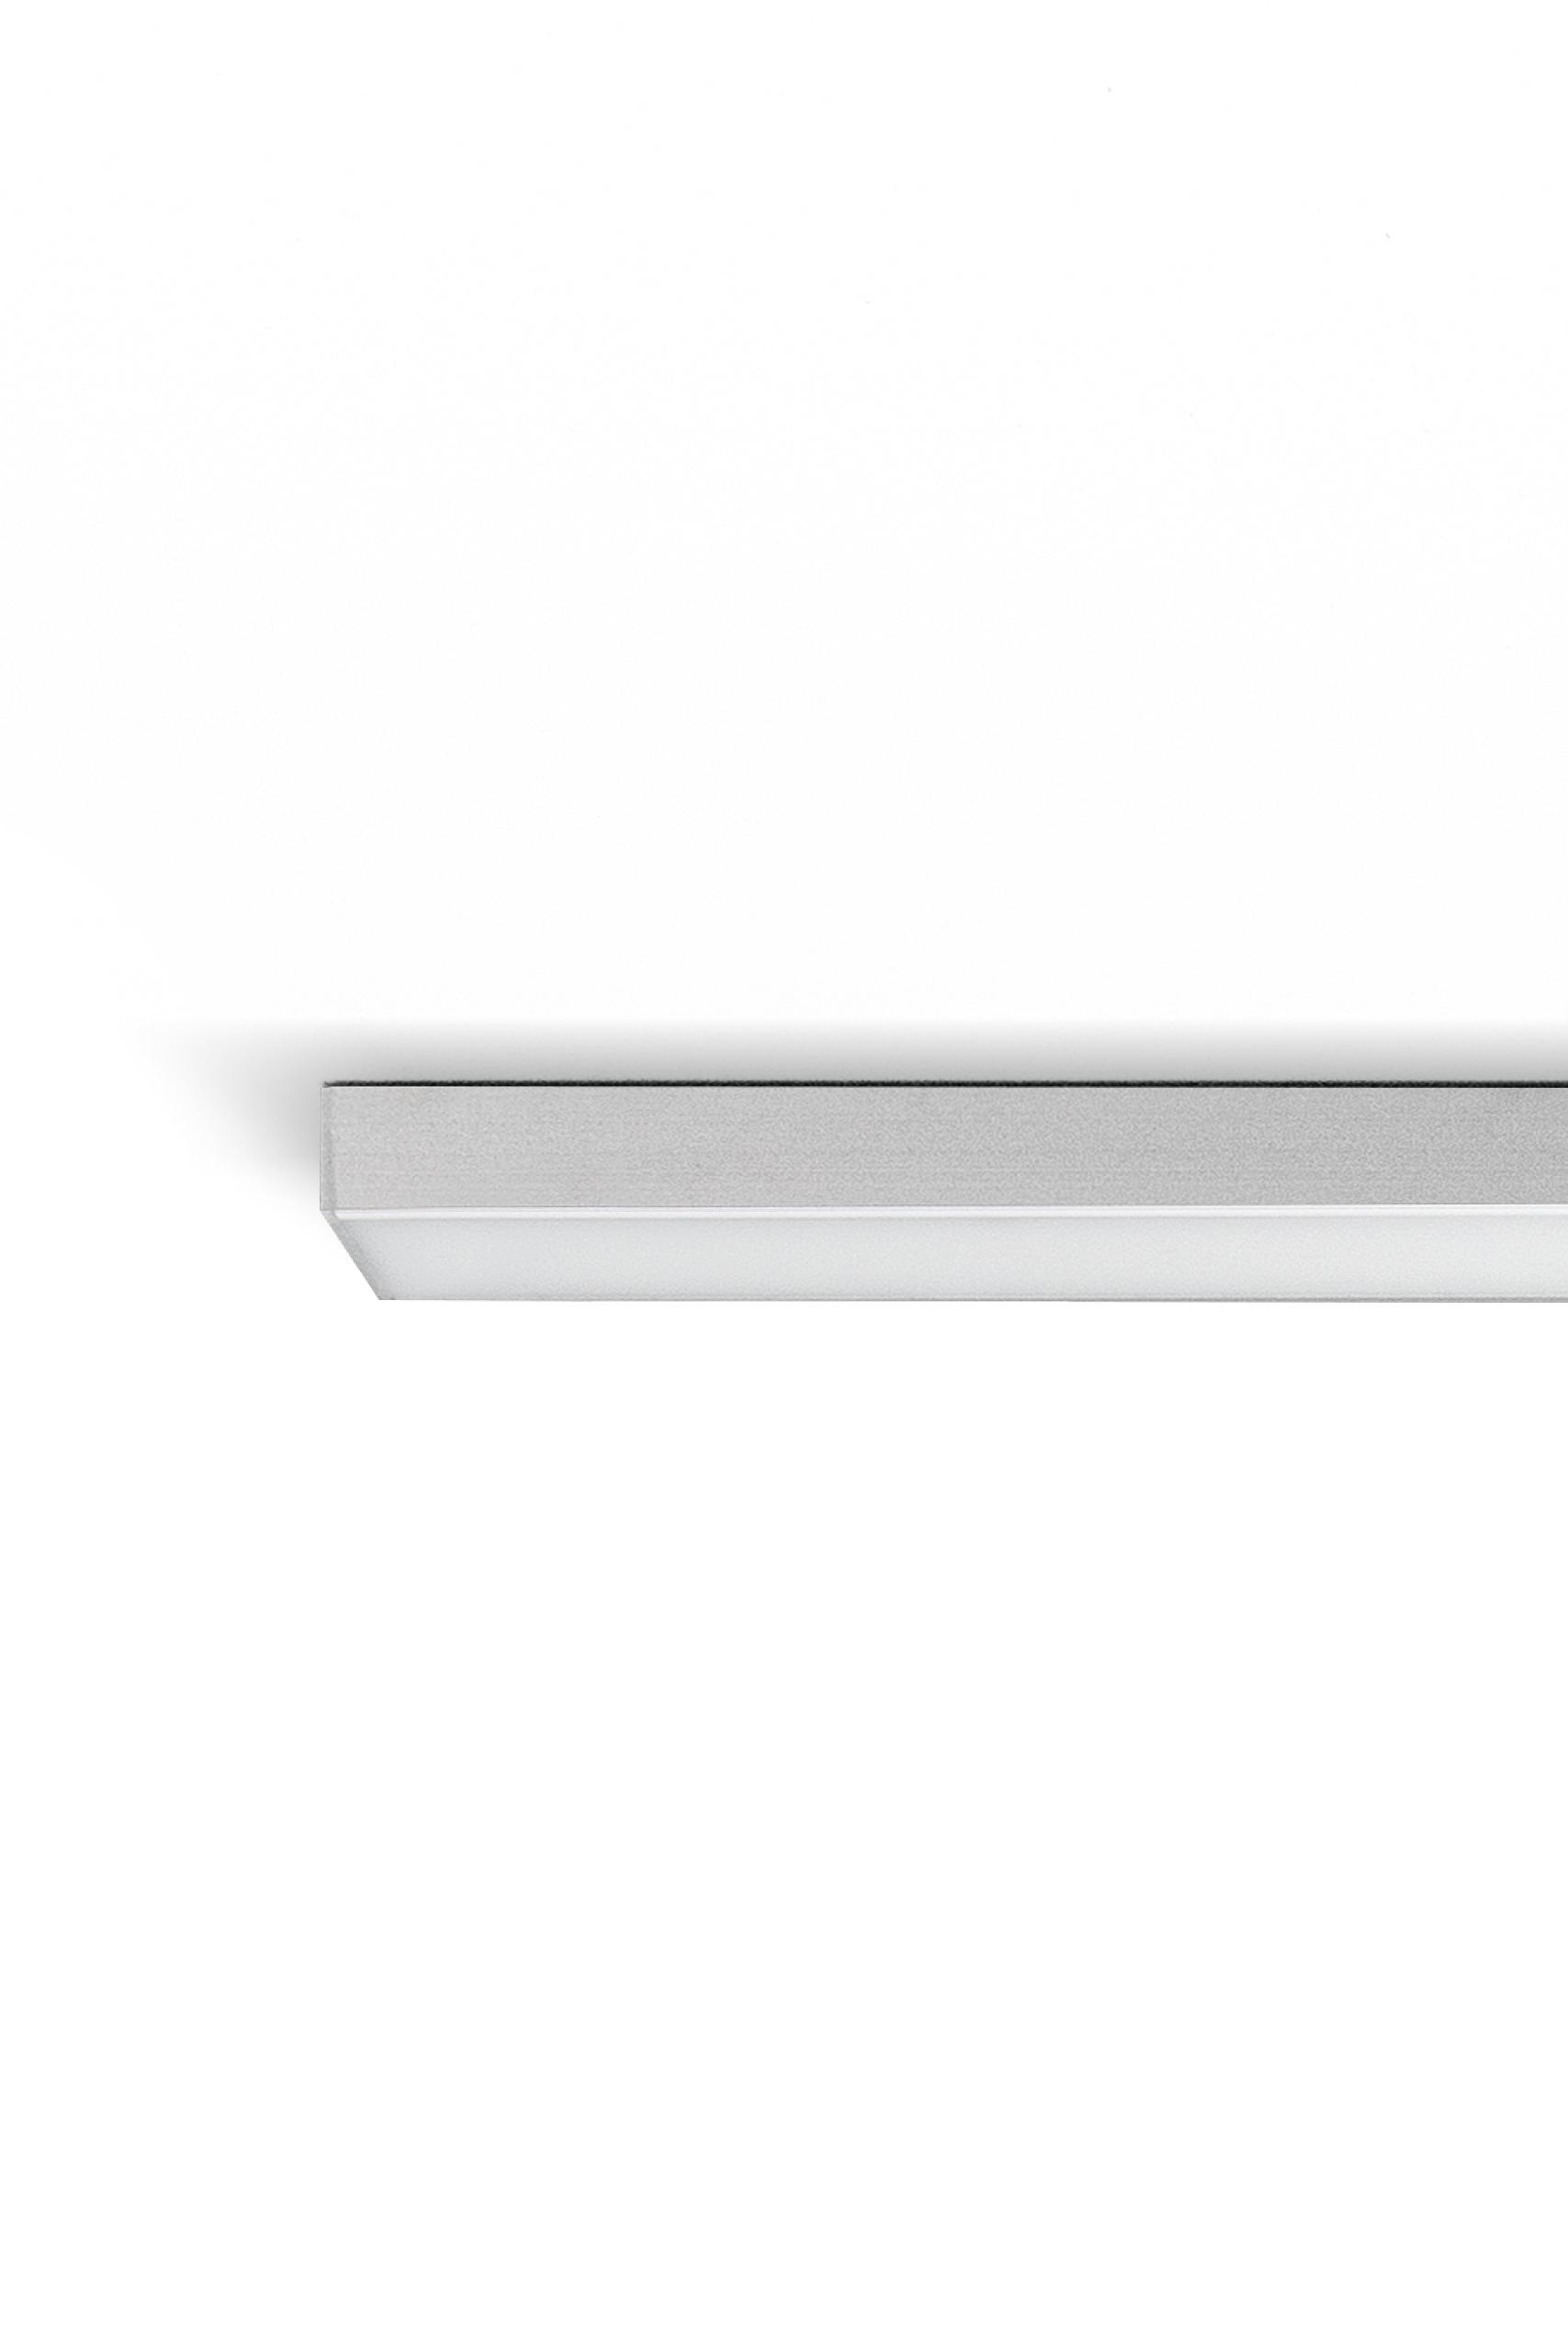 Gallery Product Thin 66 Linear Light Outdoor Linealightgroup 7